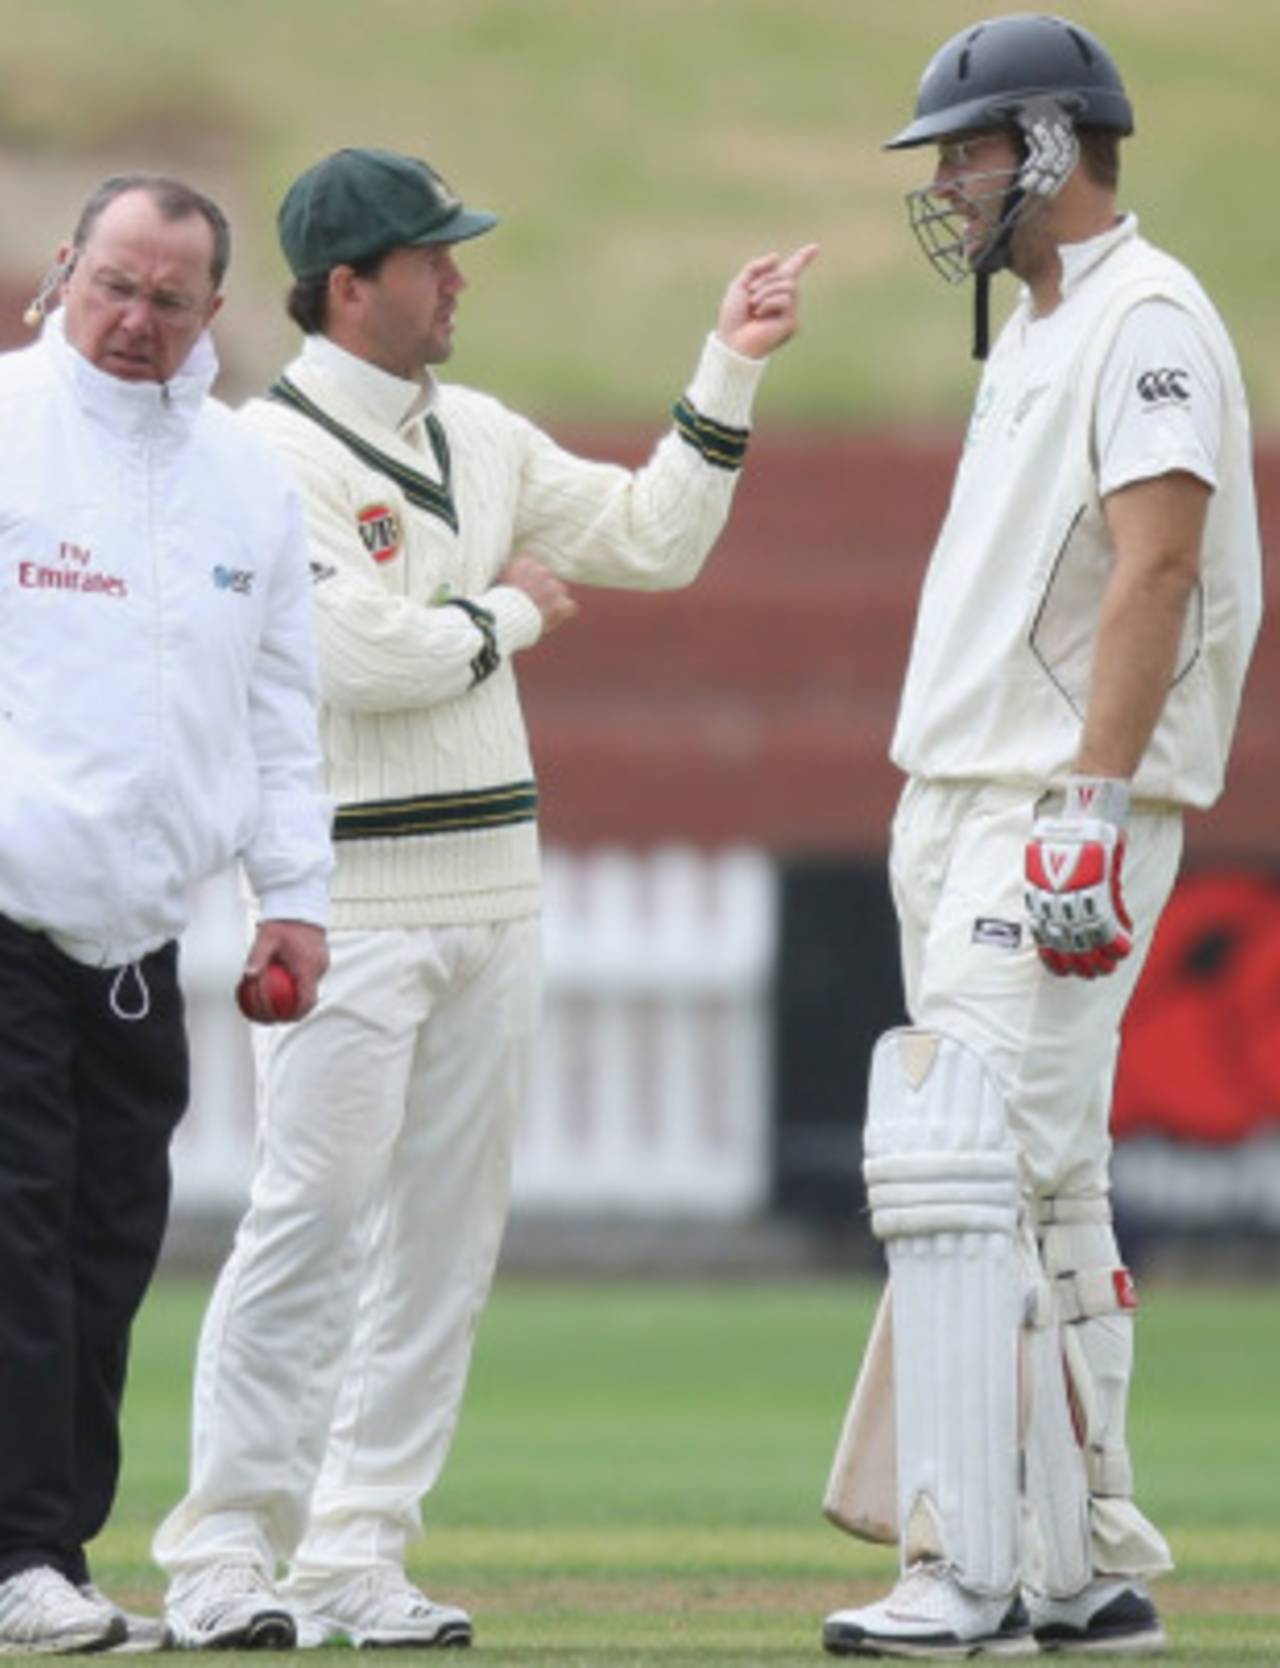 Ricky Ponting and Daniel Vettori discuss the umpiring situation after the wind stopped the hi-tech cameras from working&nbsp;&nbsp;&bull;&nbsp;&nbsp;Getty Images